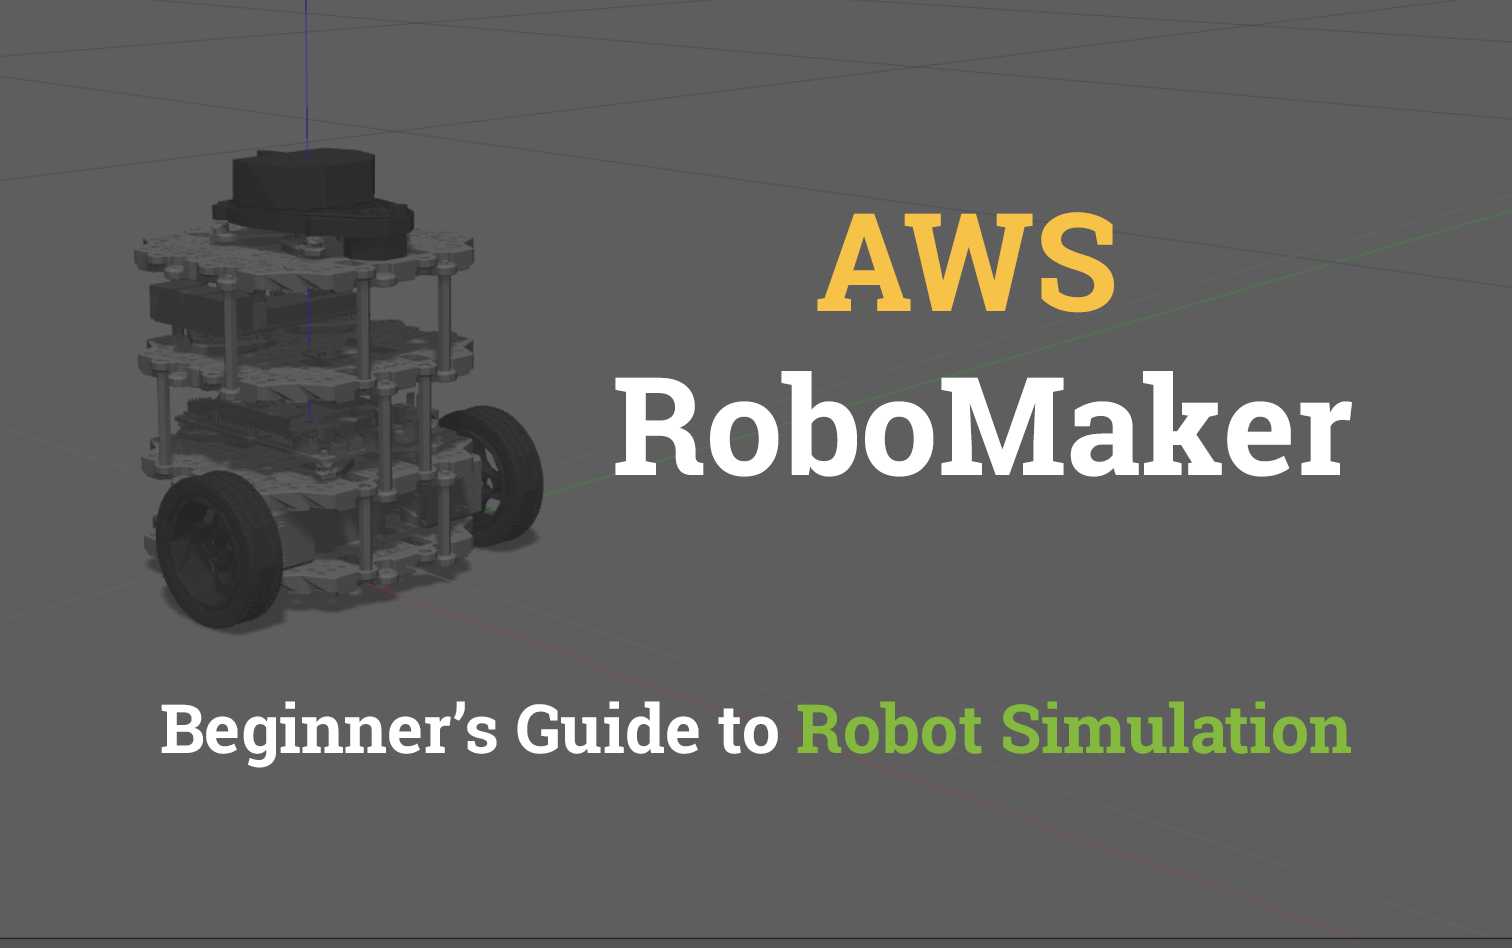 AWS RoboMaker - Beginner's Guide to Robot Simulation